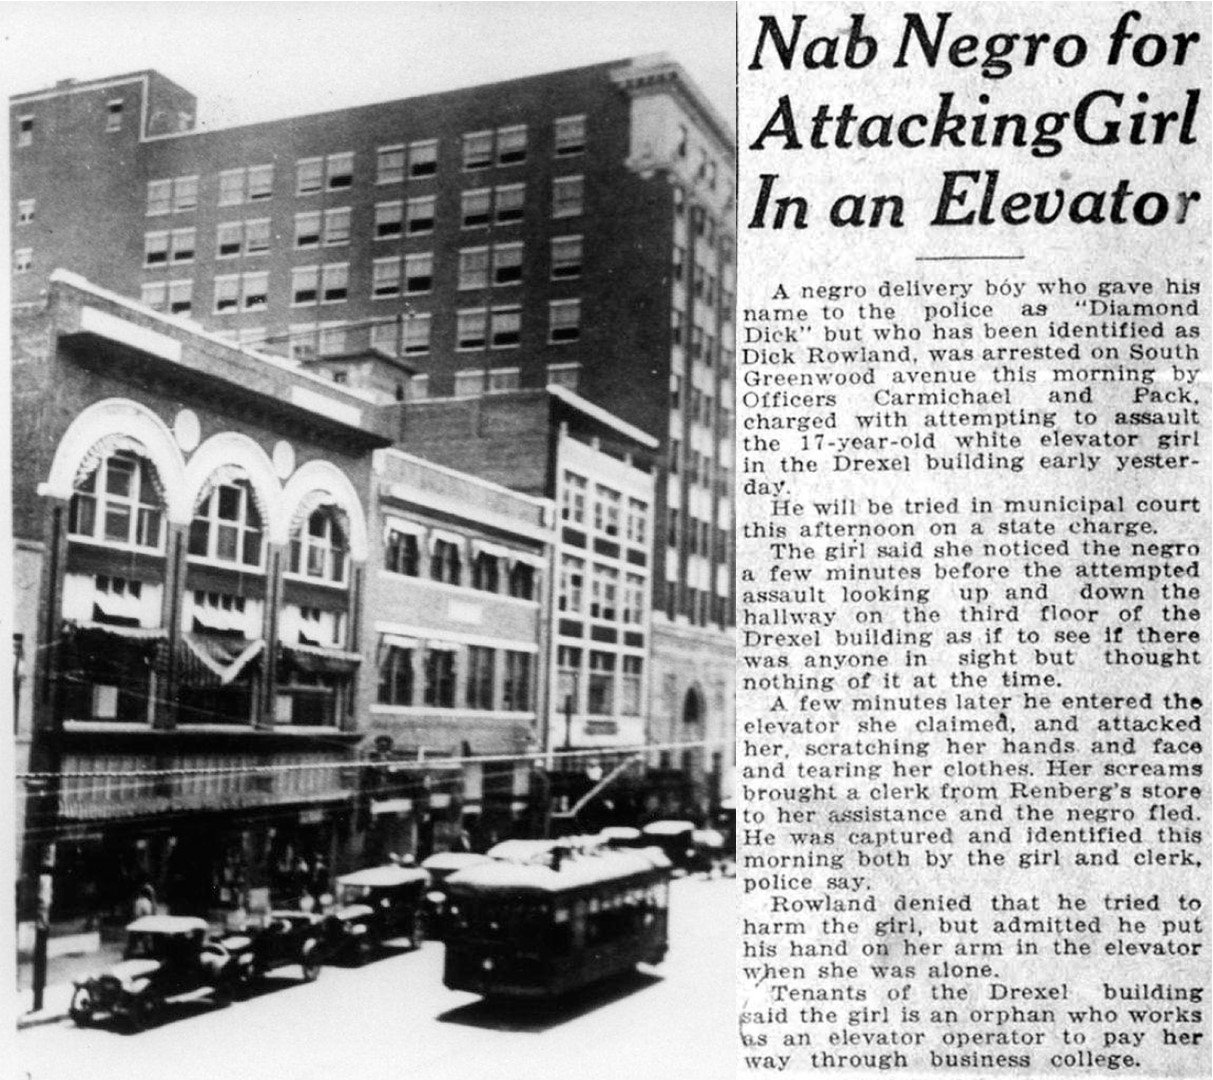 Drexel building and newspaper article